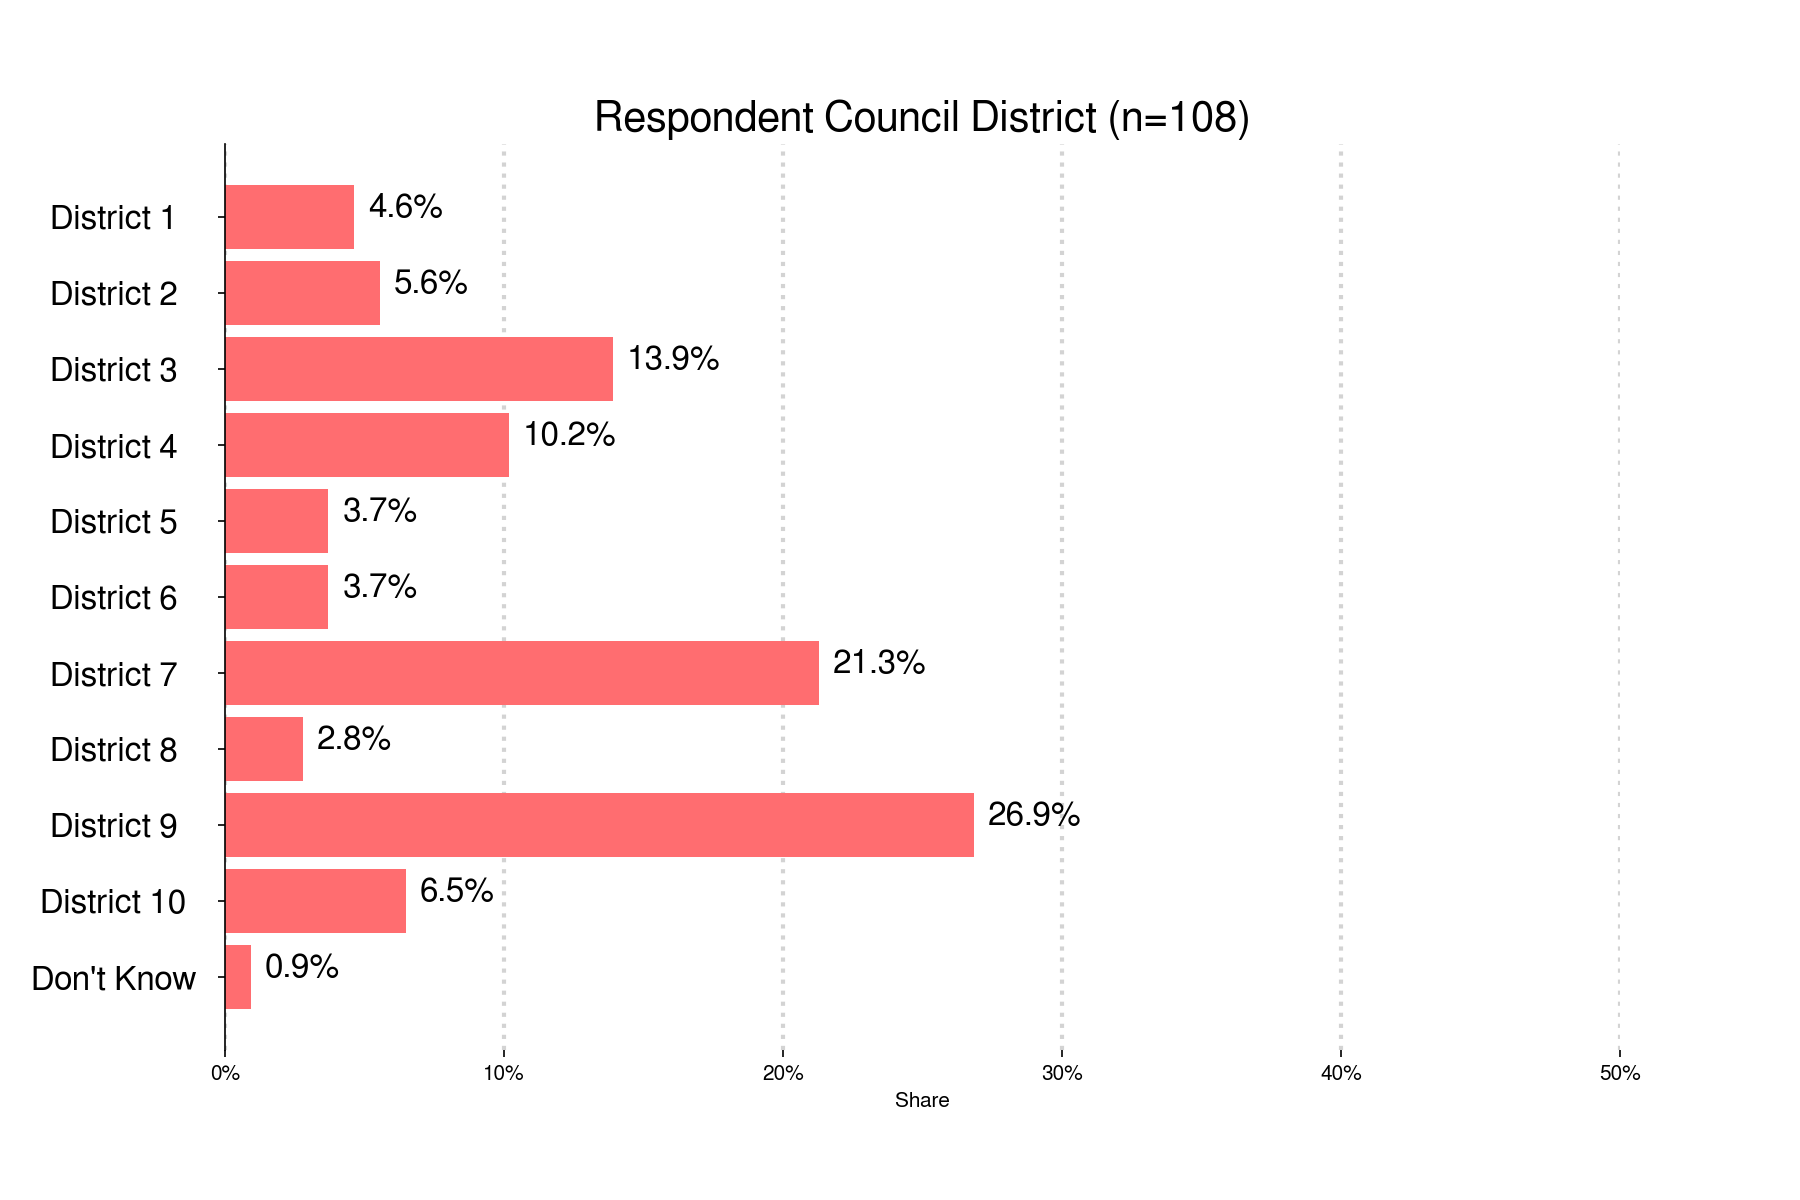 A horizontal bar chart. It indicates the respondent percentage share for each council district.